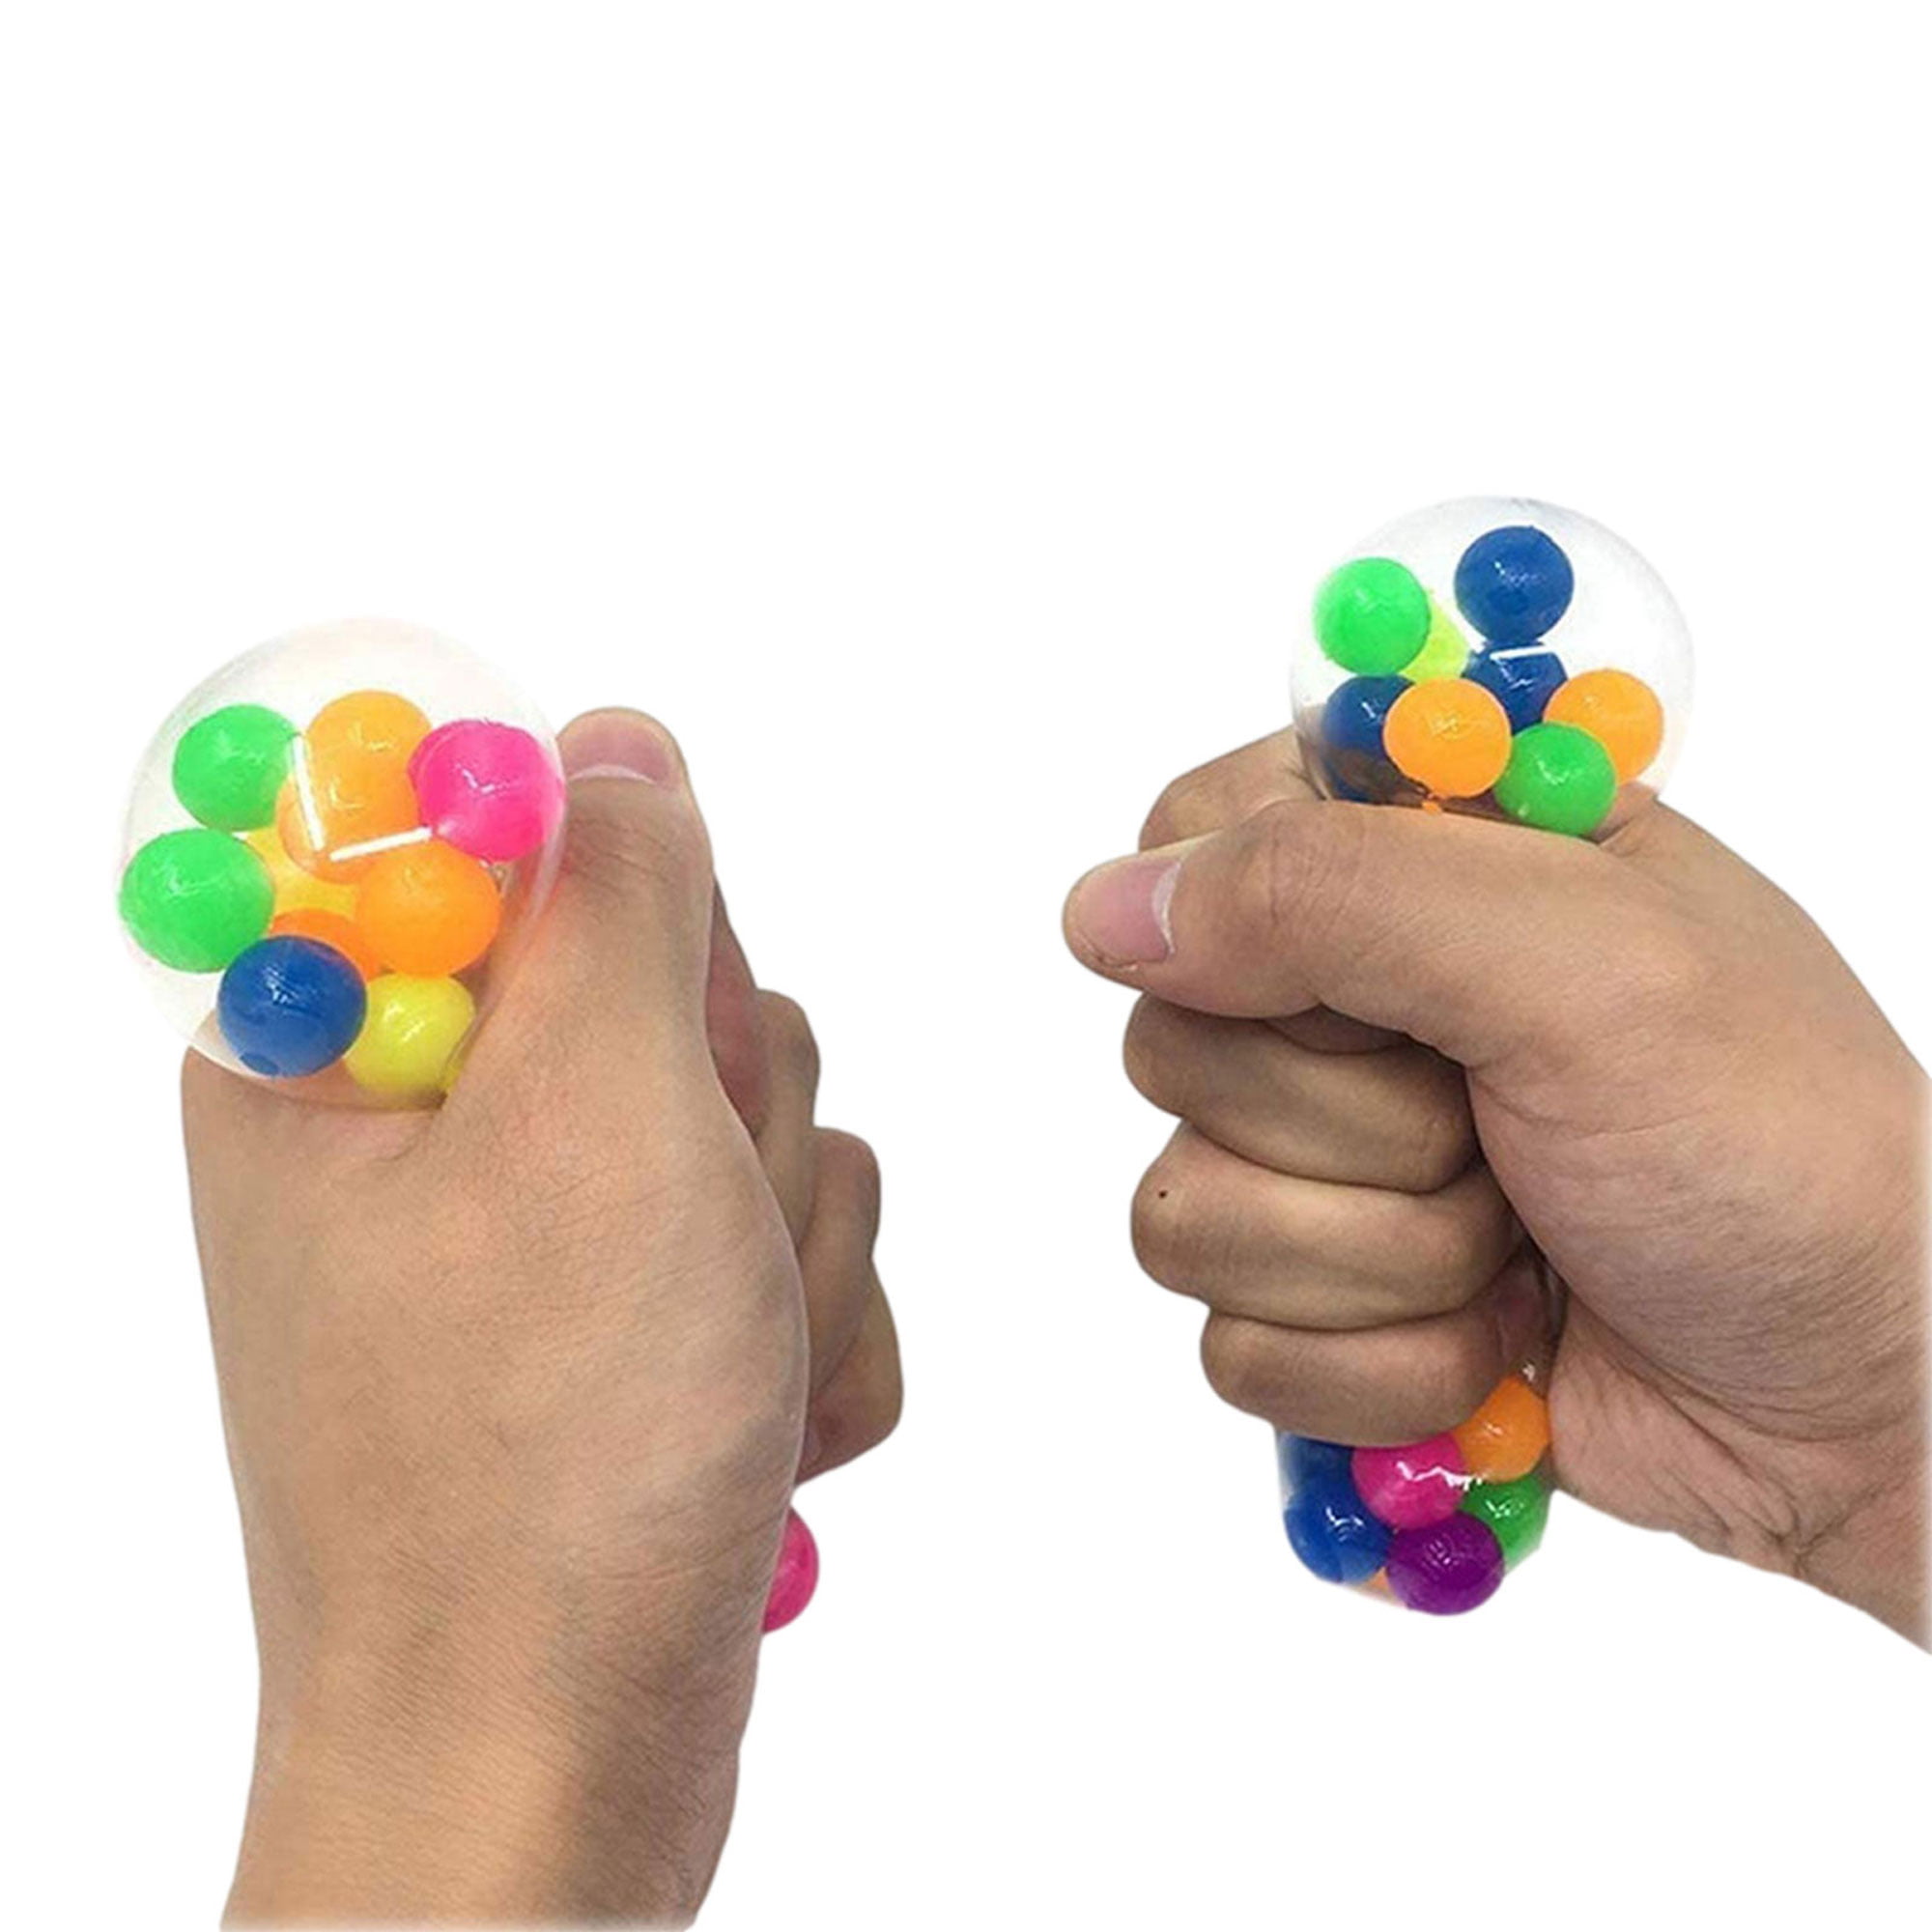 Squishy Rainbow Stress Ball Fidget Toy with DNA Colorful Beads Inside Relieve Stress Anxiety Hand Exercise Tool for Kids Adults